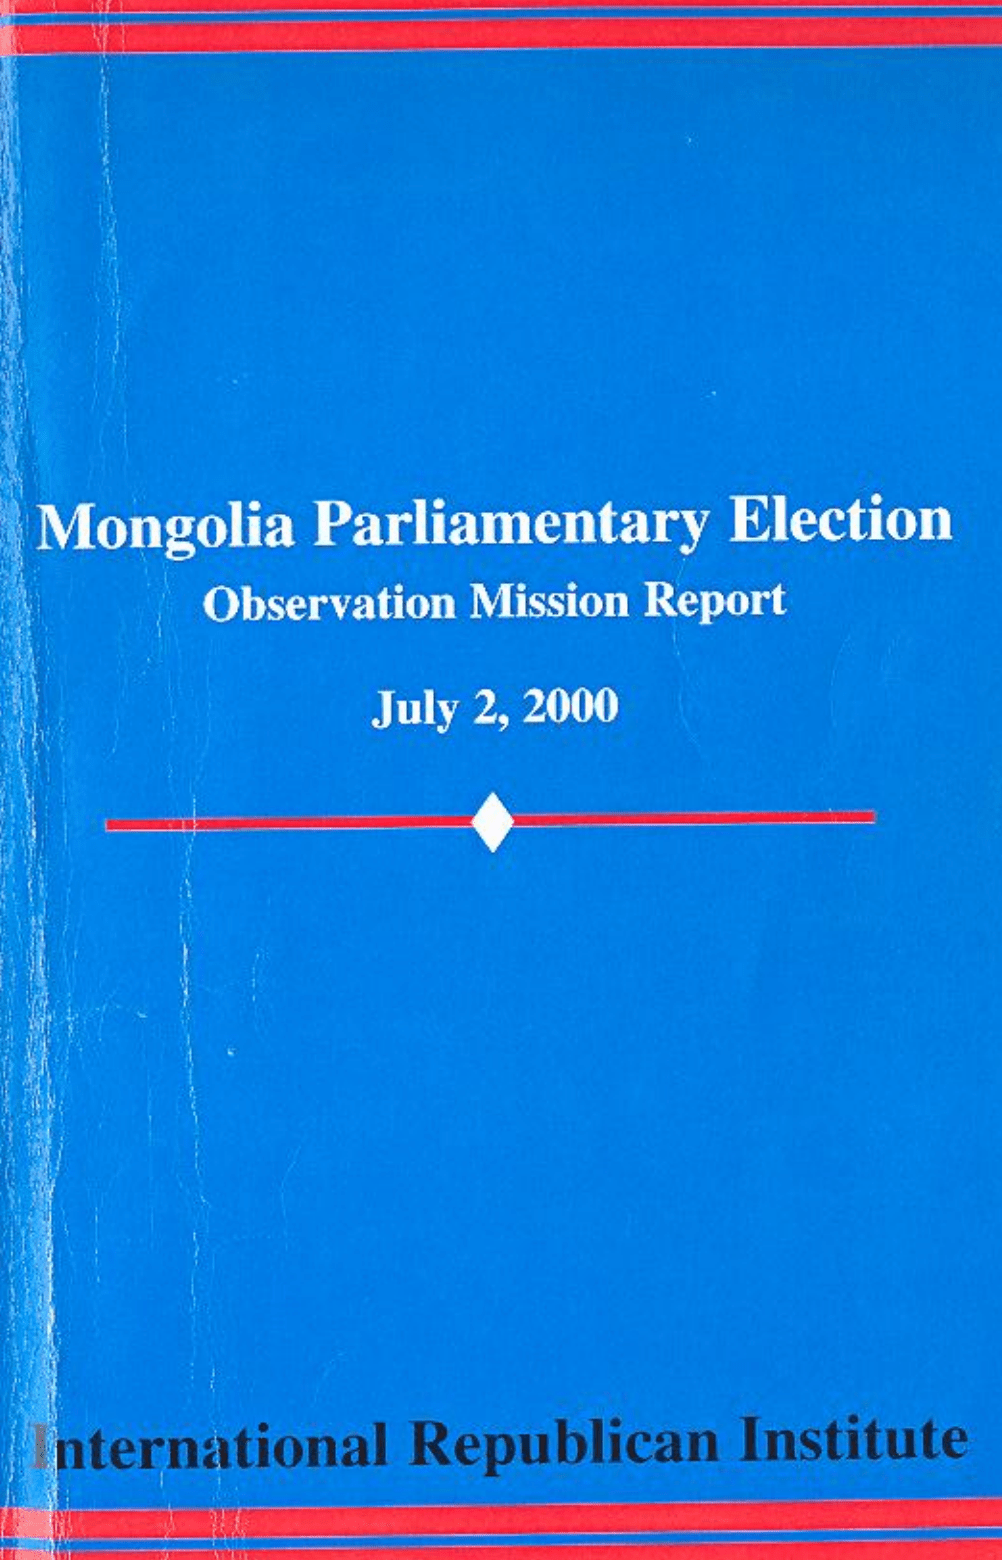 Mongolia Parliamentary Election: Observation Mission Report (July 2, 2000)